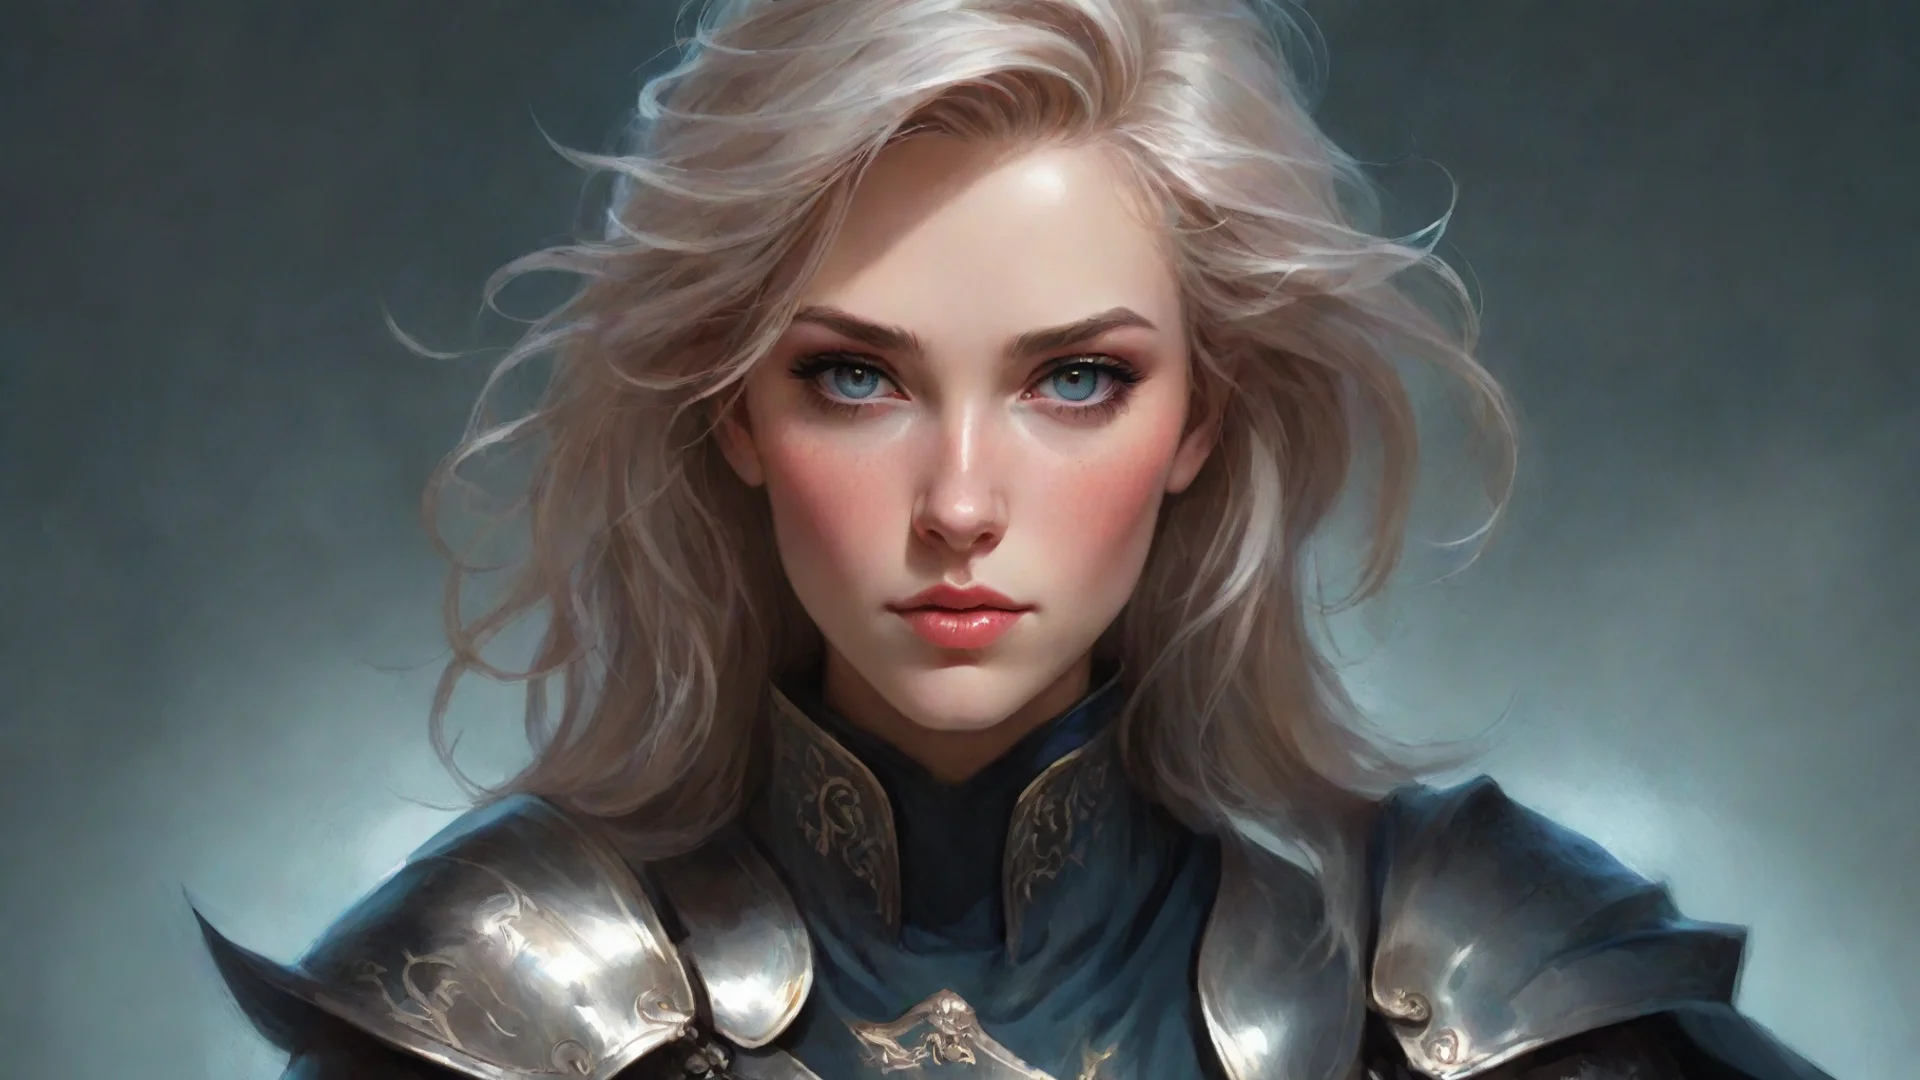 amazing stunning portrait illustration beautiful androgynous wizard knight by ross tran by charlie bowater illustration highly d awesome portrait 2 wide